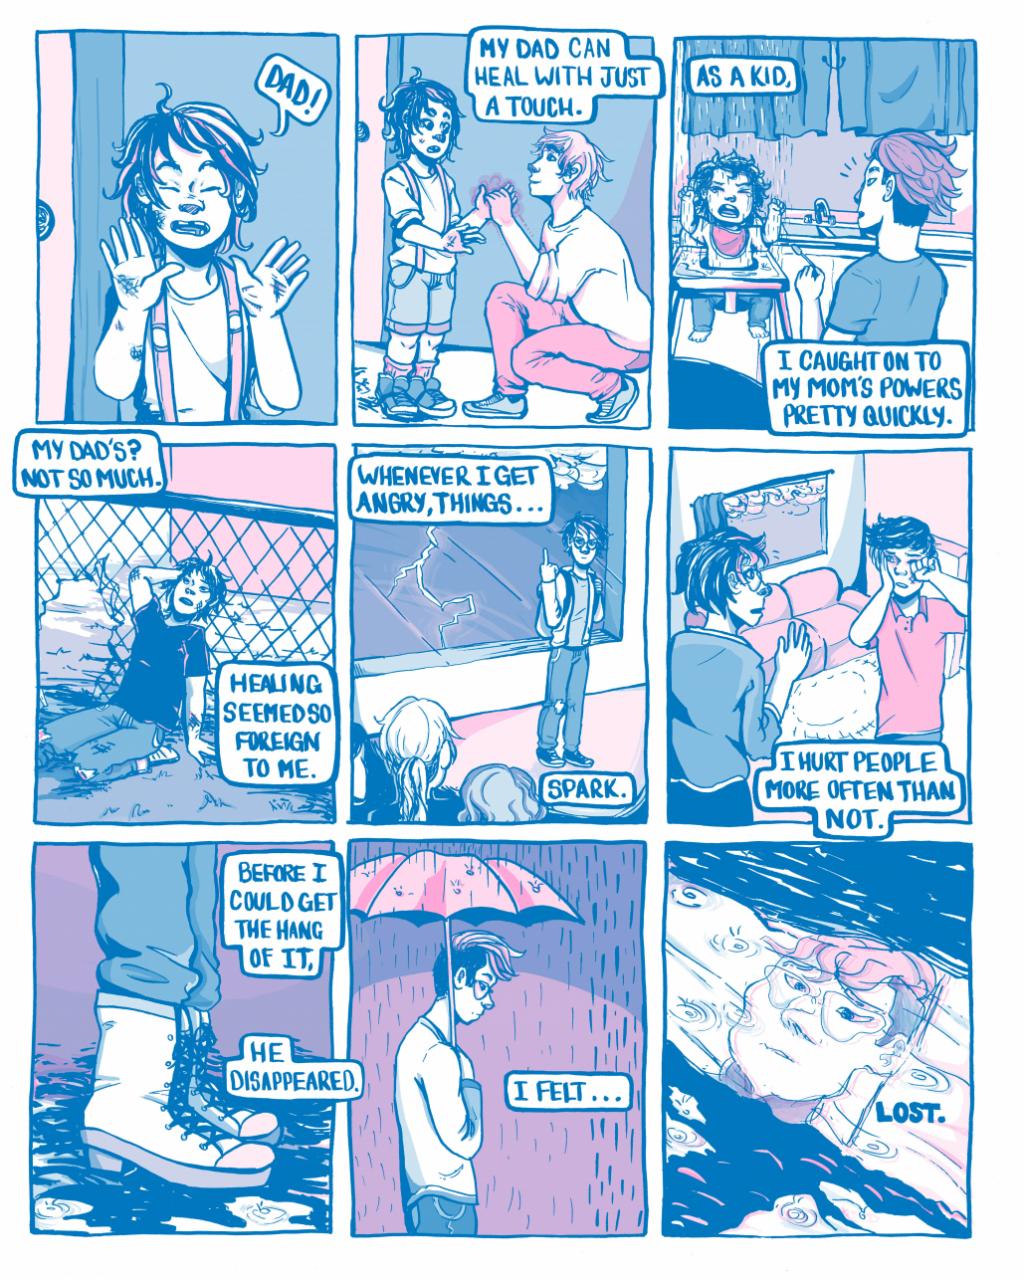 Comic page of a child remembering their father by Remy Burke